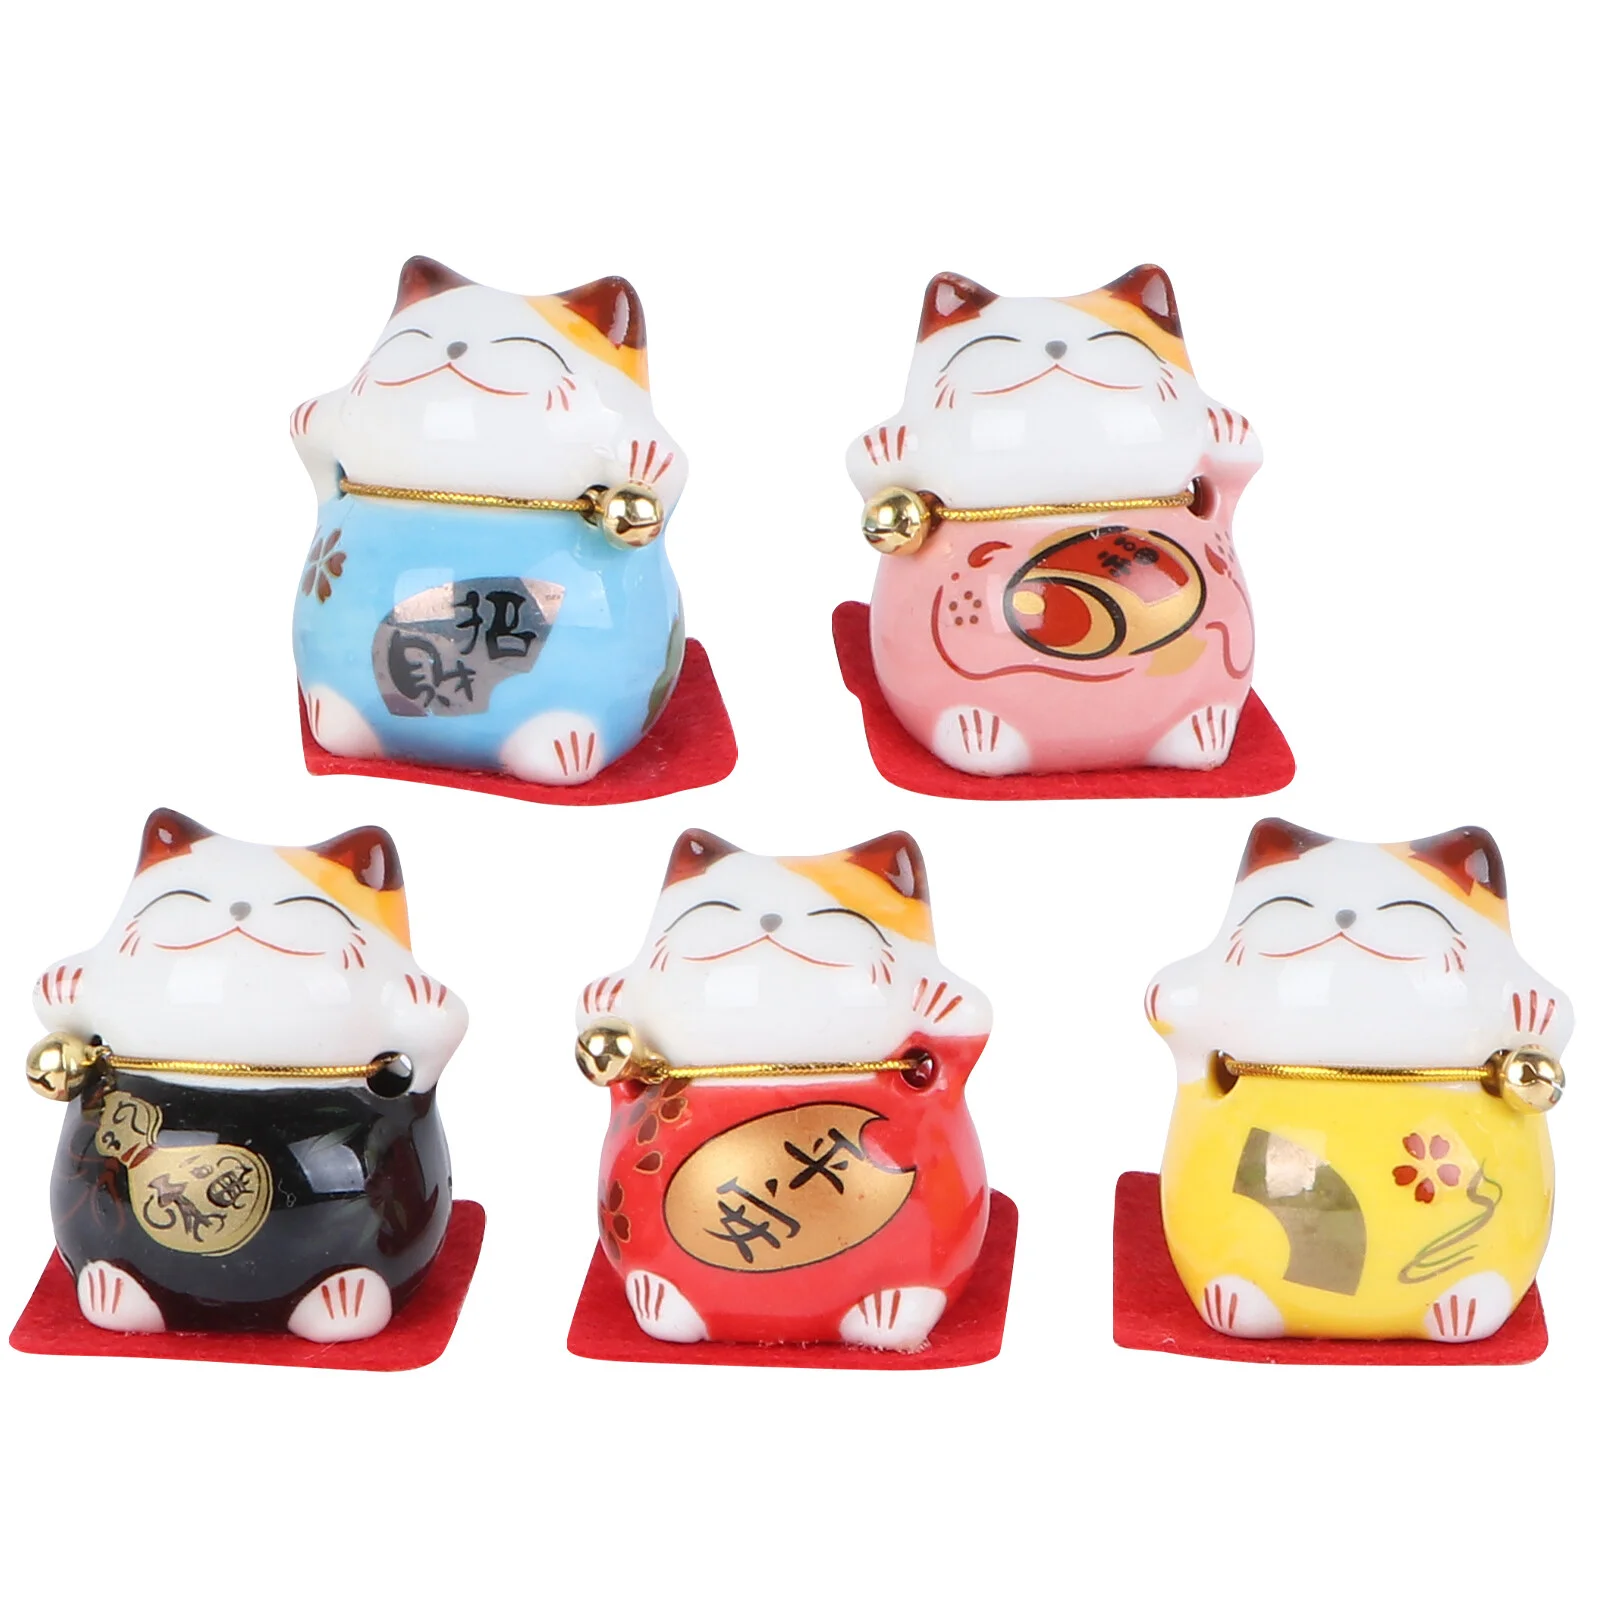 

5 Pcs Lucky Cat Adorable Ornament Cake Decorations Tabletop Adornment Car Creative Ceramic Toppers Fortune Accessory